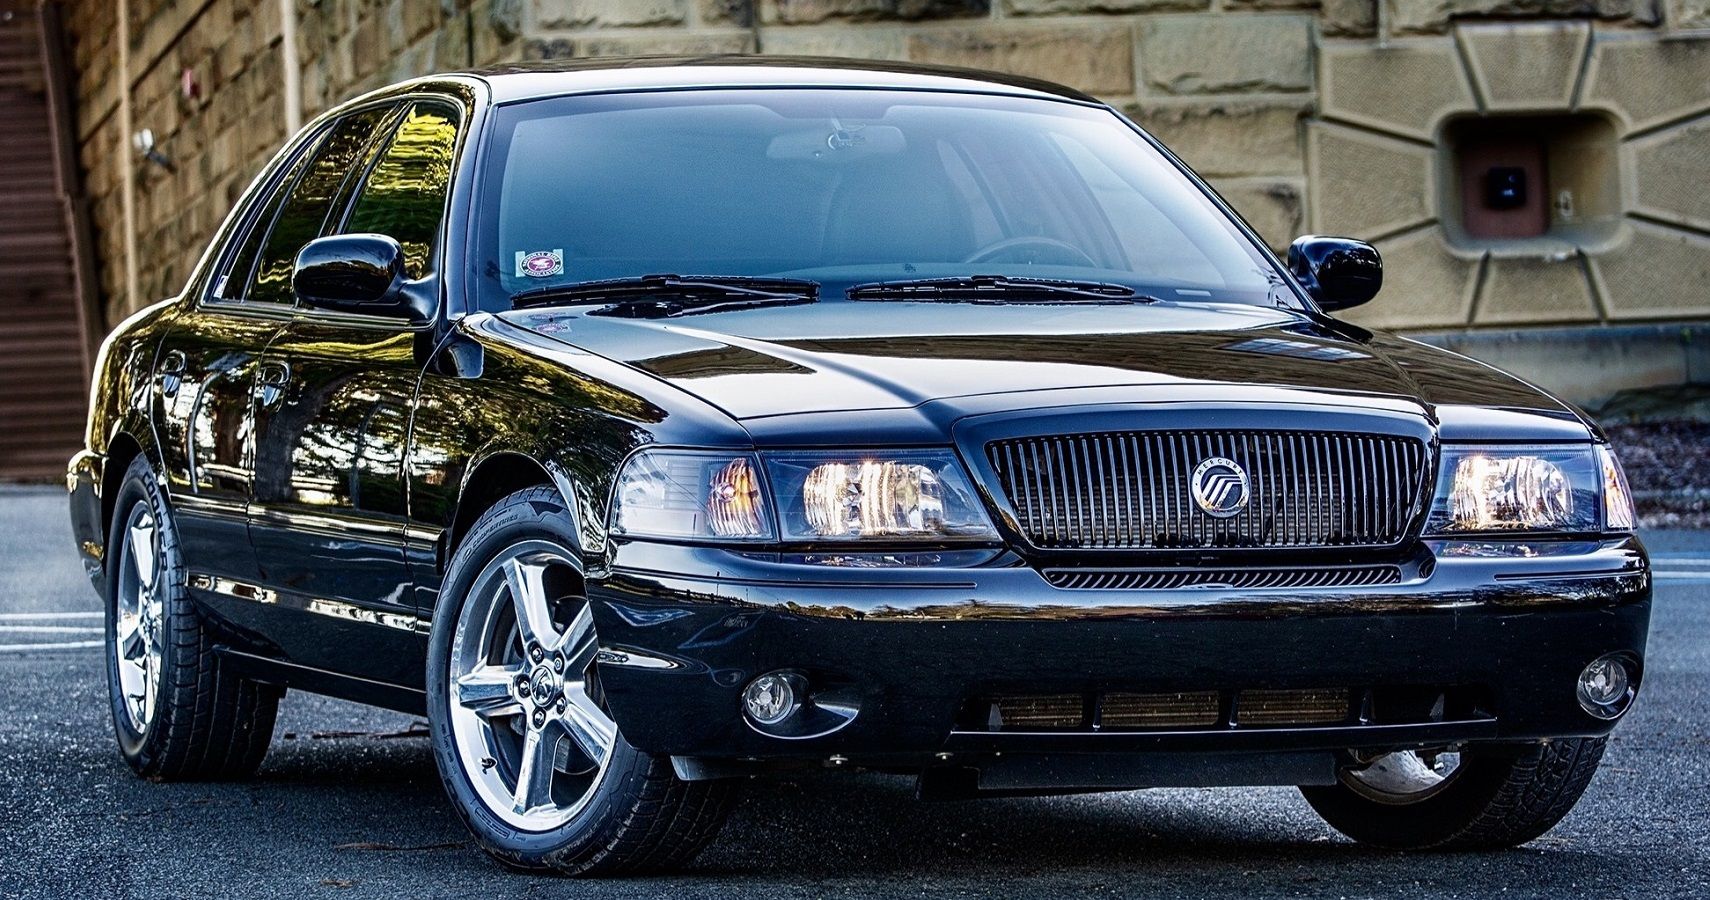 Here's Why The Mercury Marauder Is One Of The Most Underrated Muscle Cars